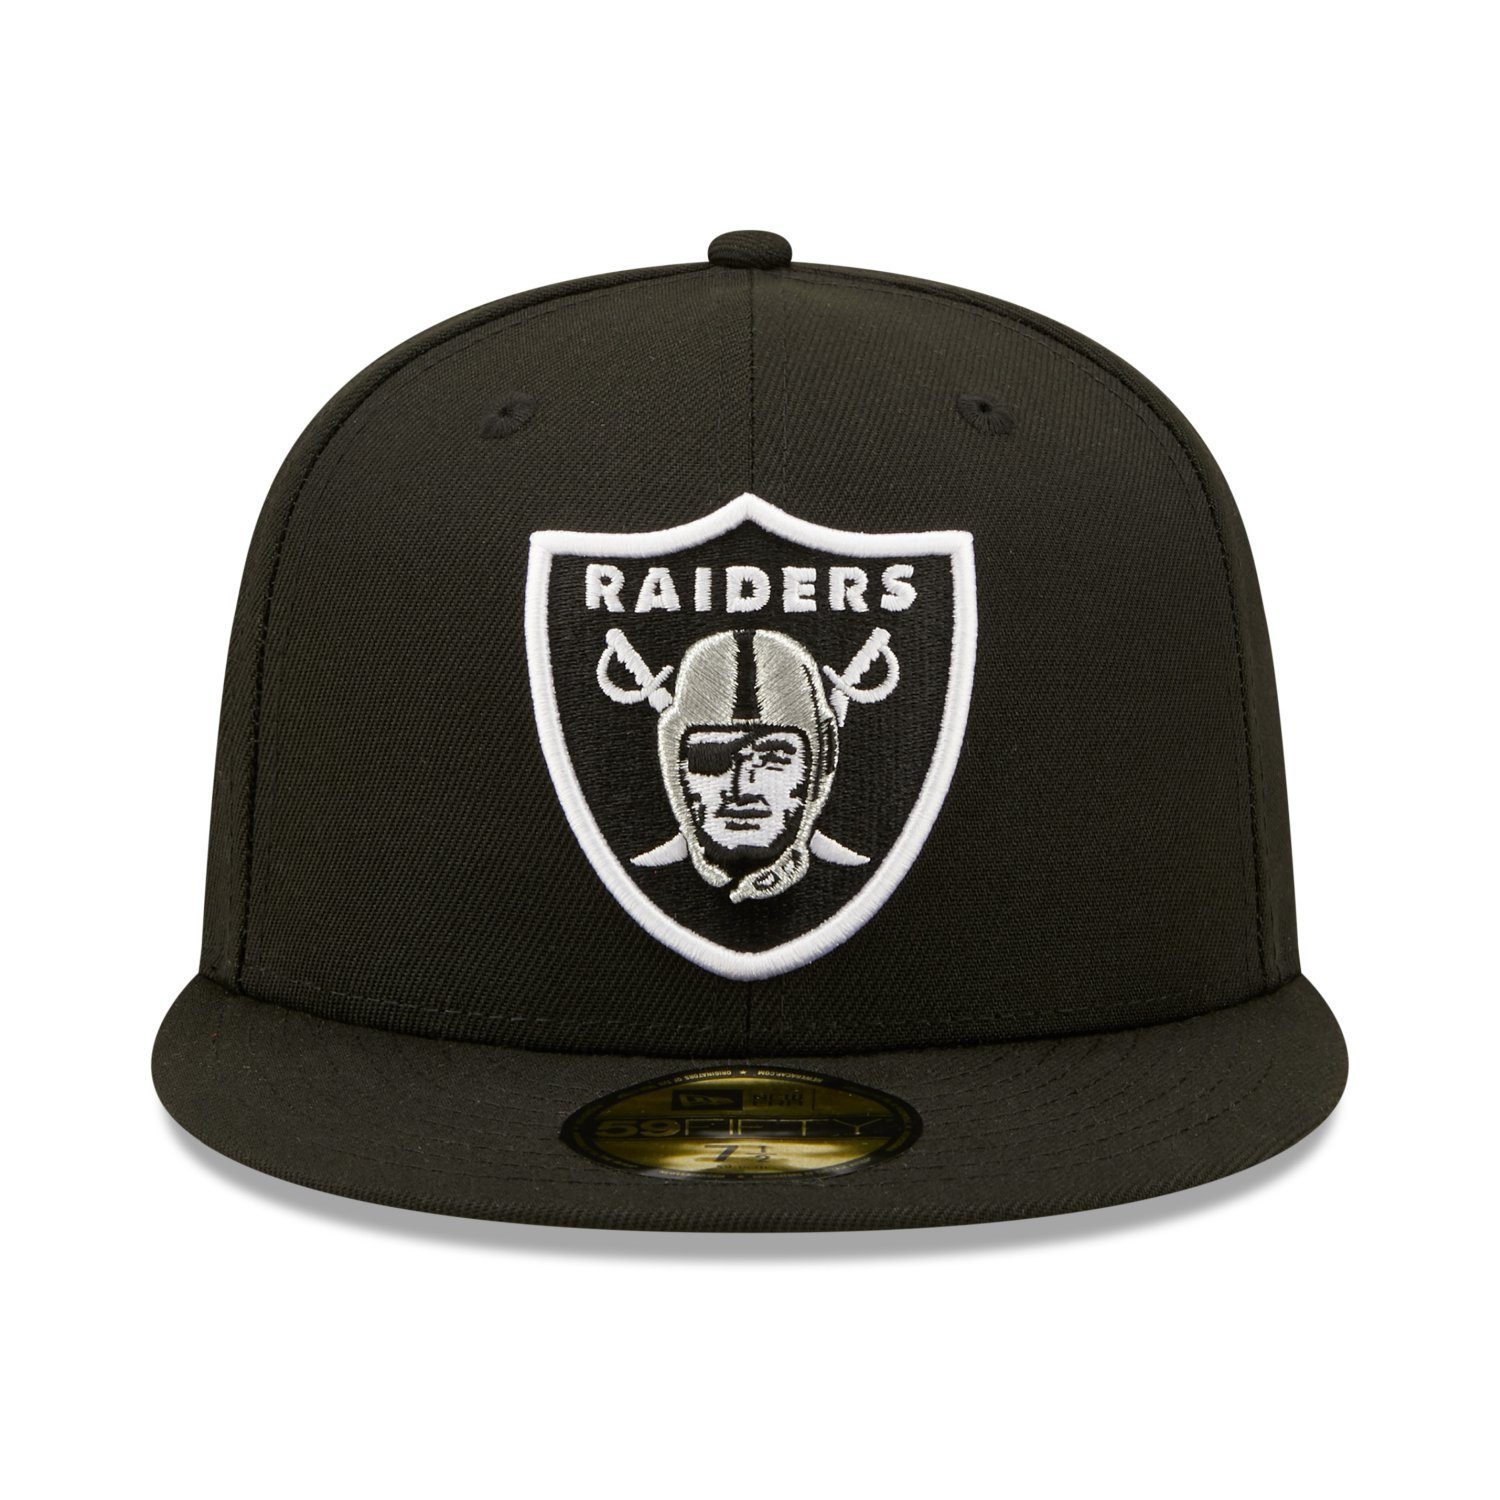 Cap Las 50 59Fifty Years Raiders New Fitted Era Vegas